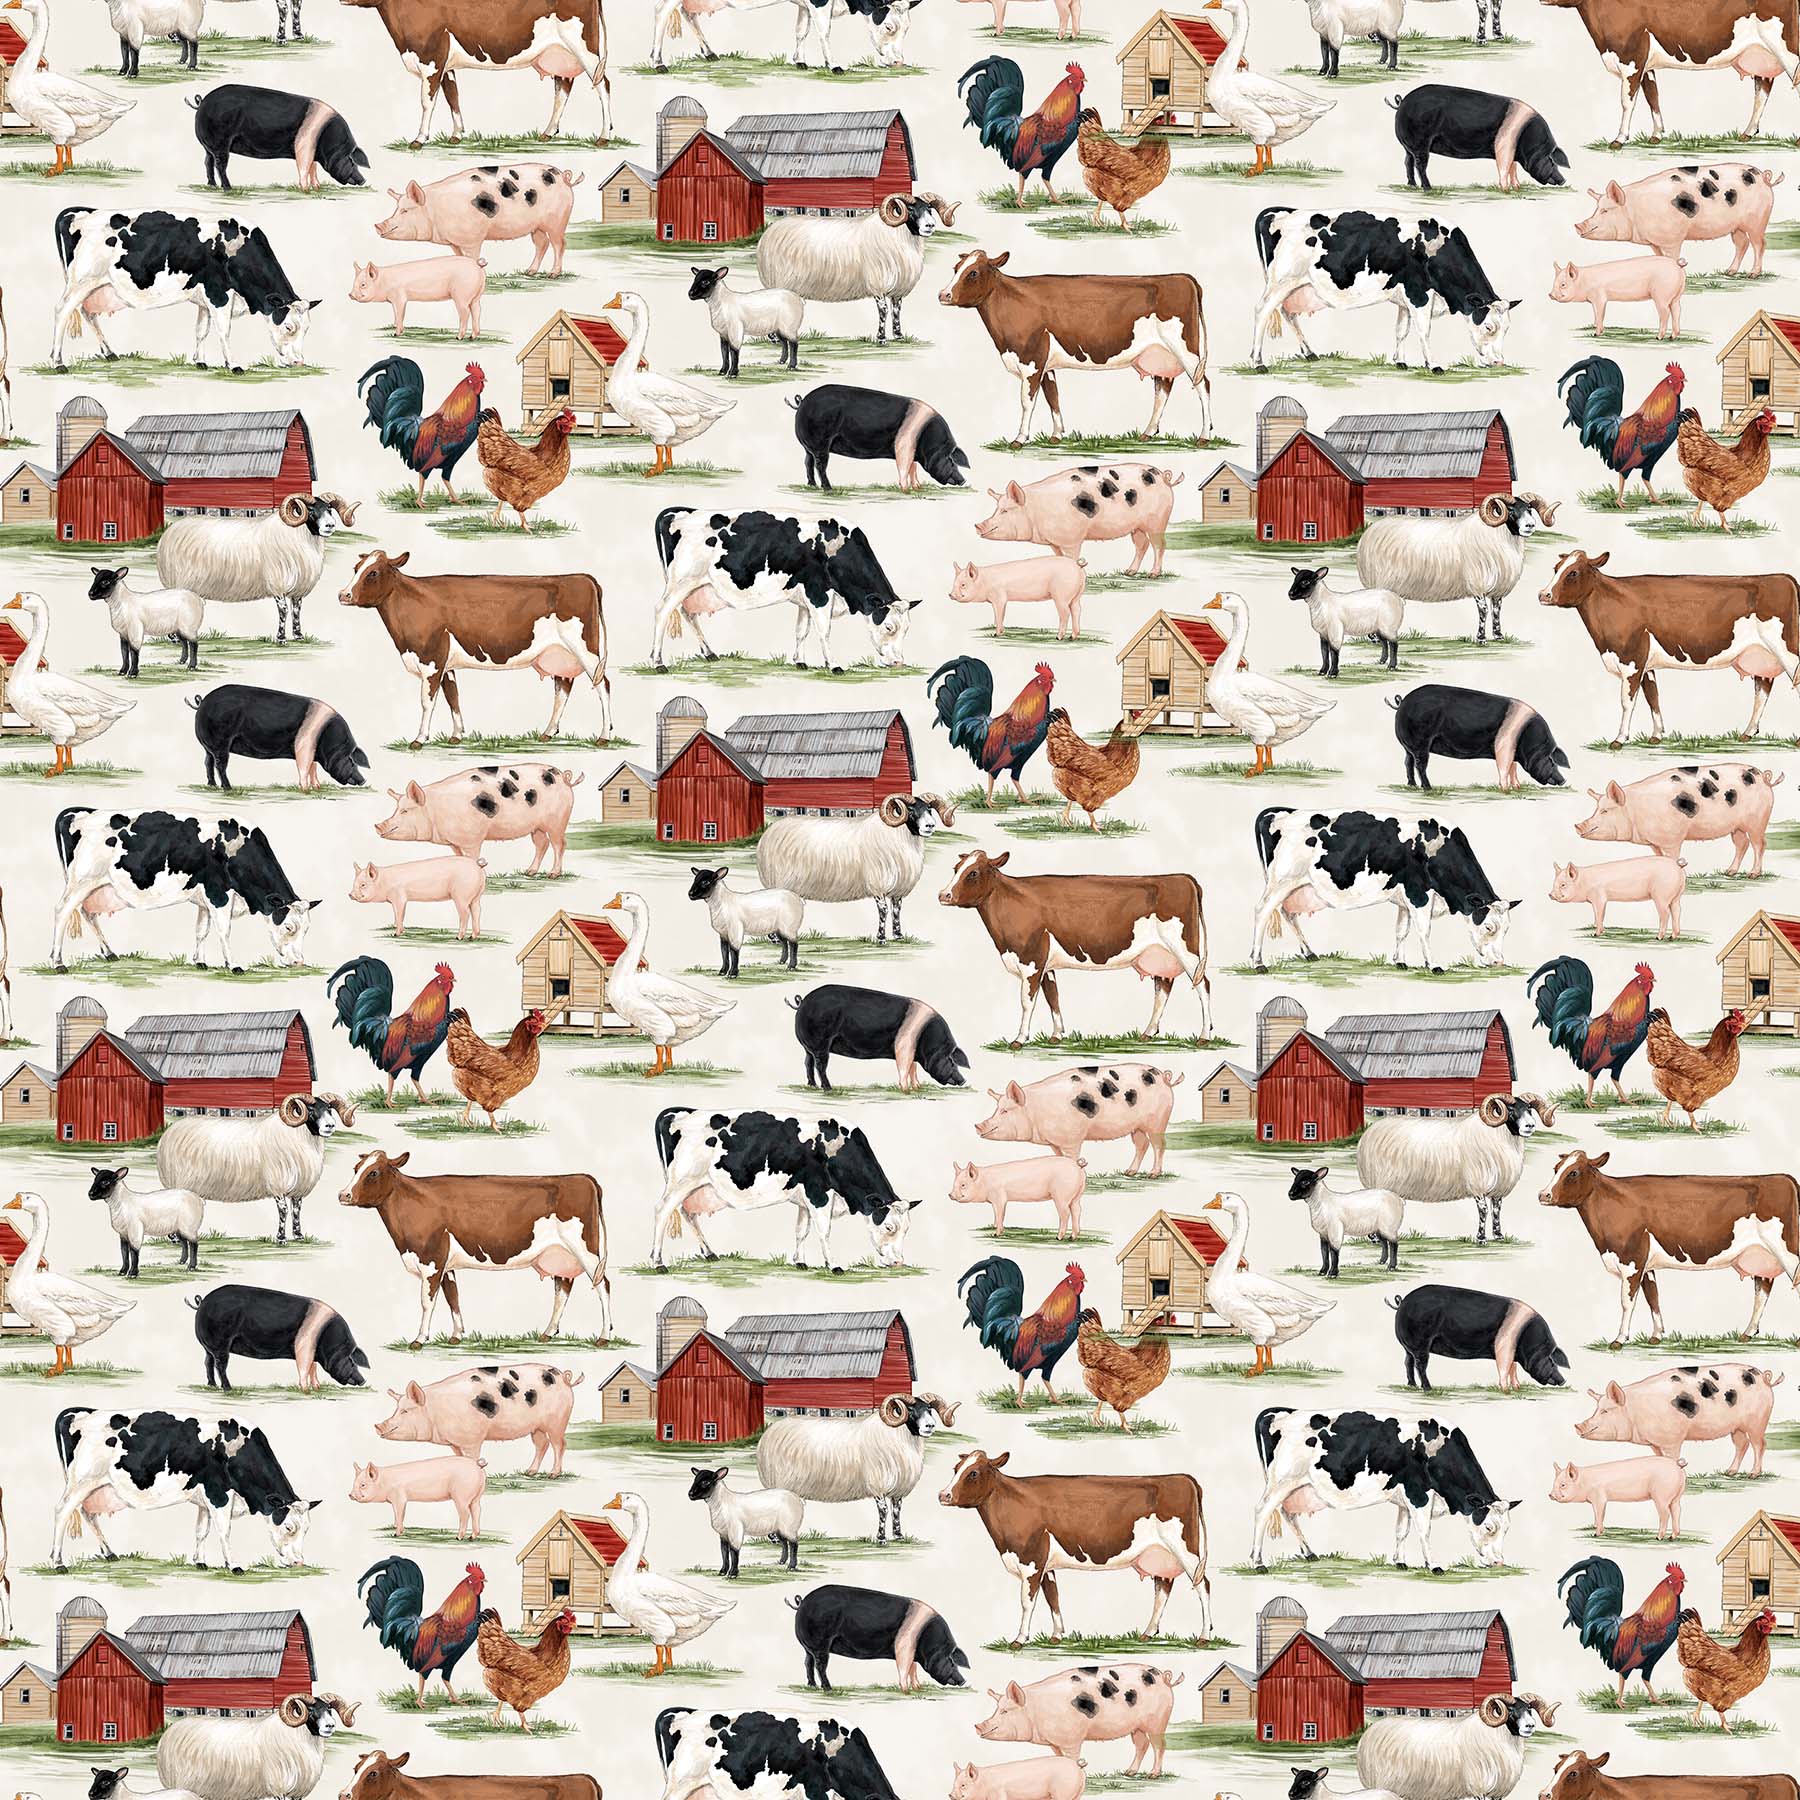 Homegrown Happiness 100% Cotton Fabric - DP24358-11 - By the Yard - Animals Cream Multi